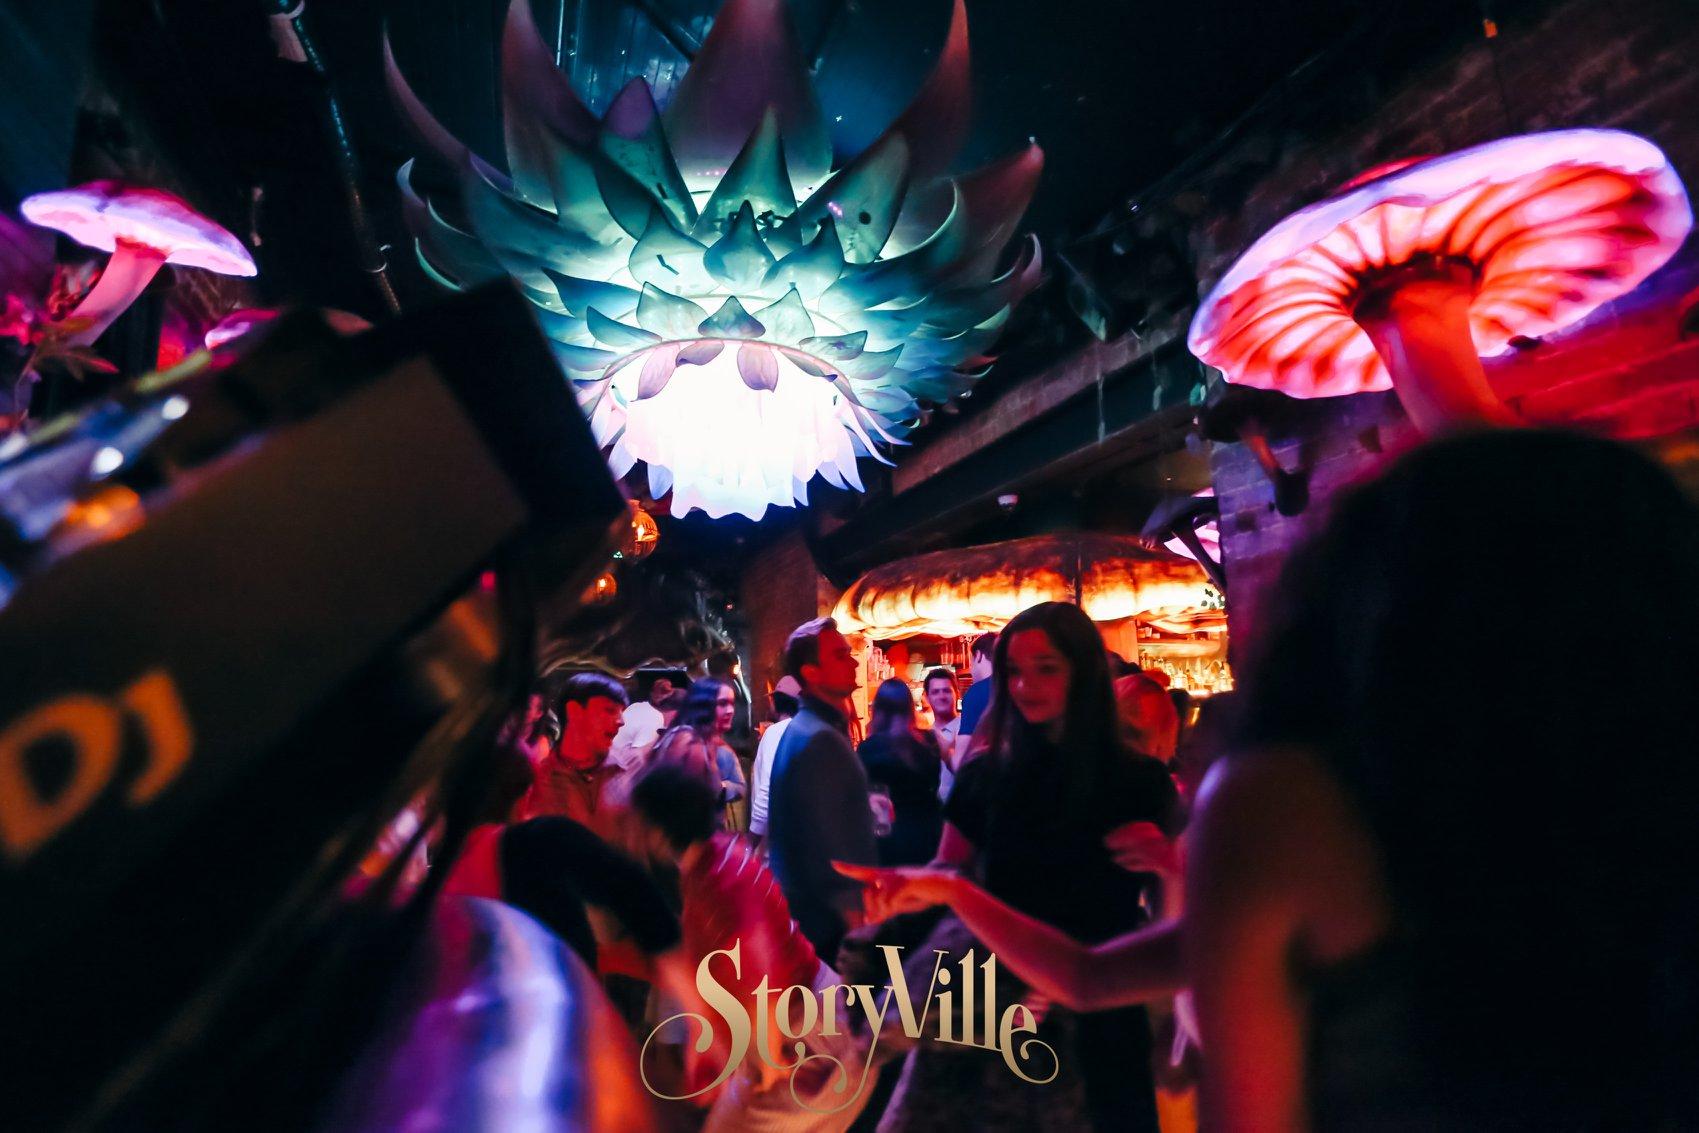 Friday Socials Party (Shot included), at STORYVILLE!